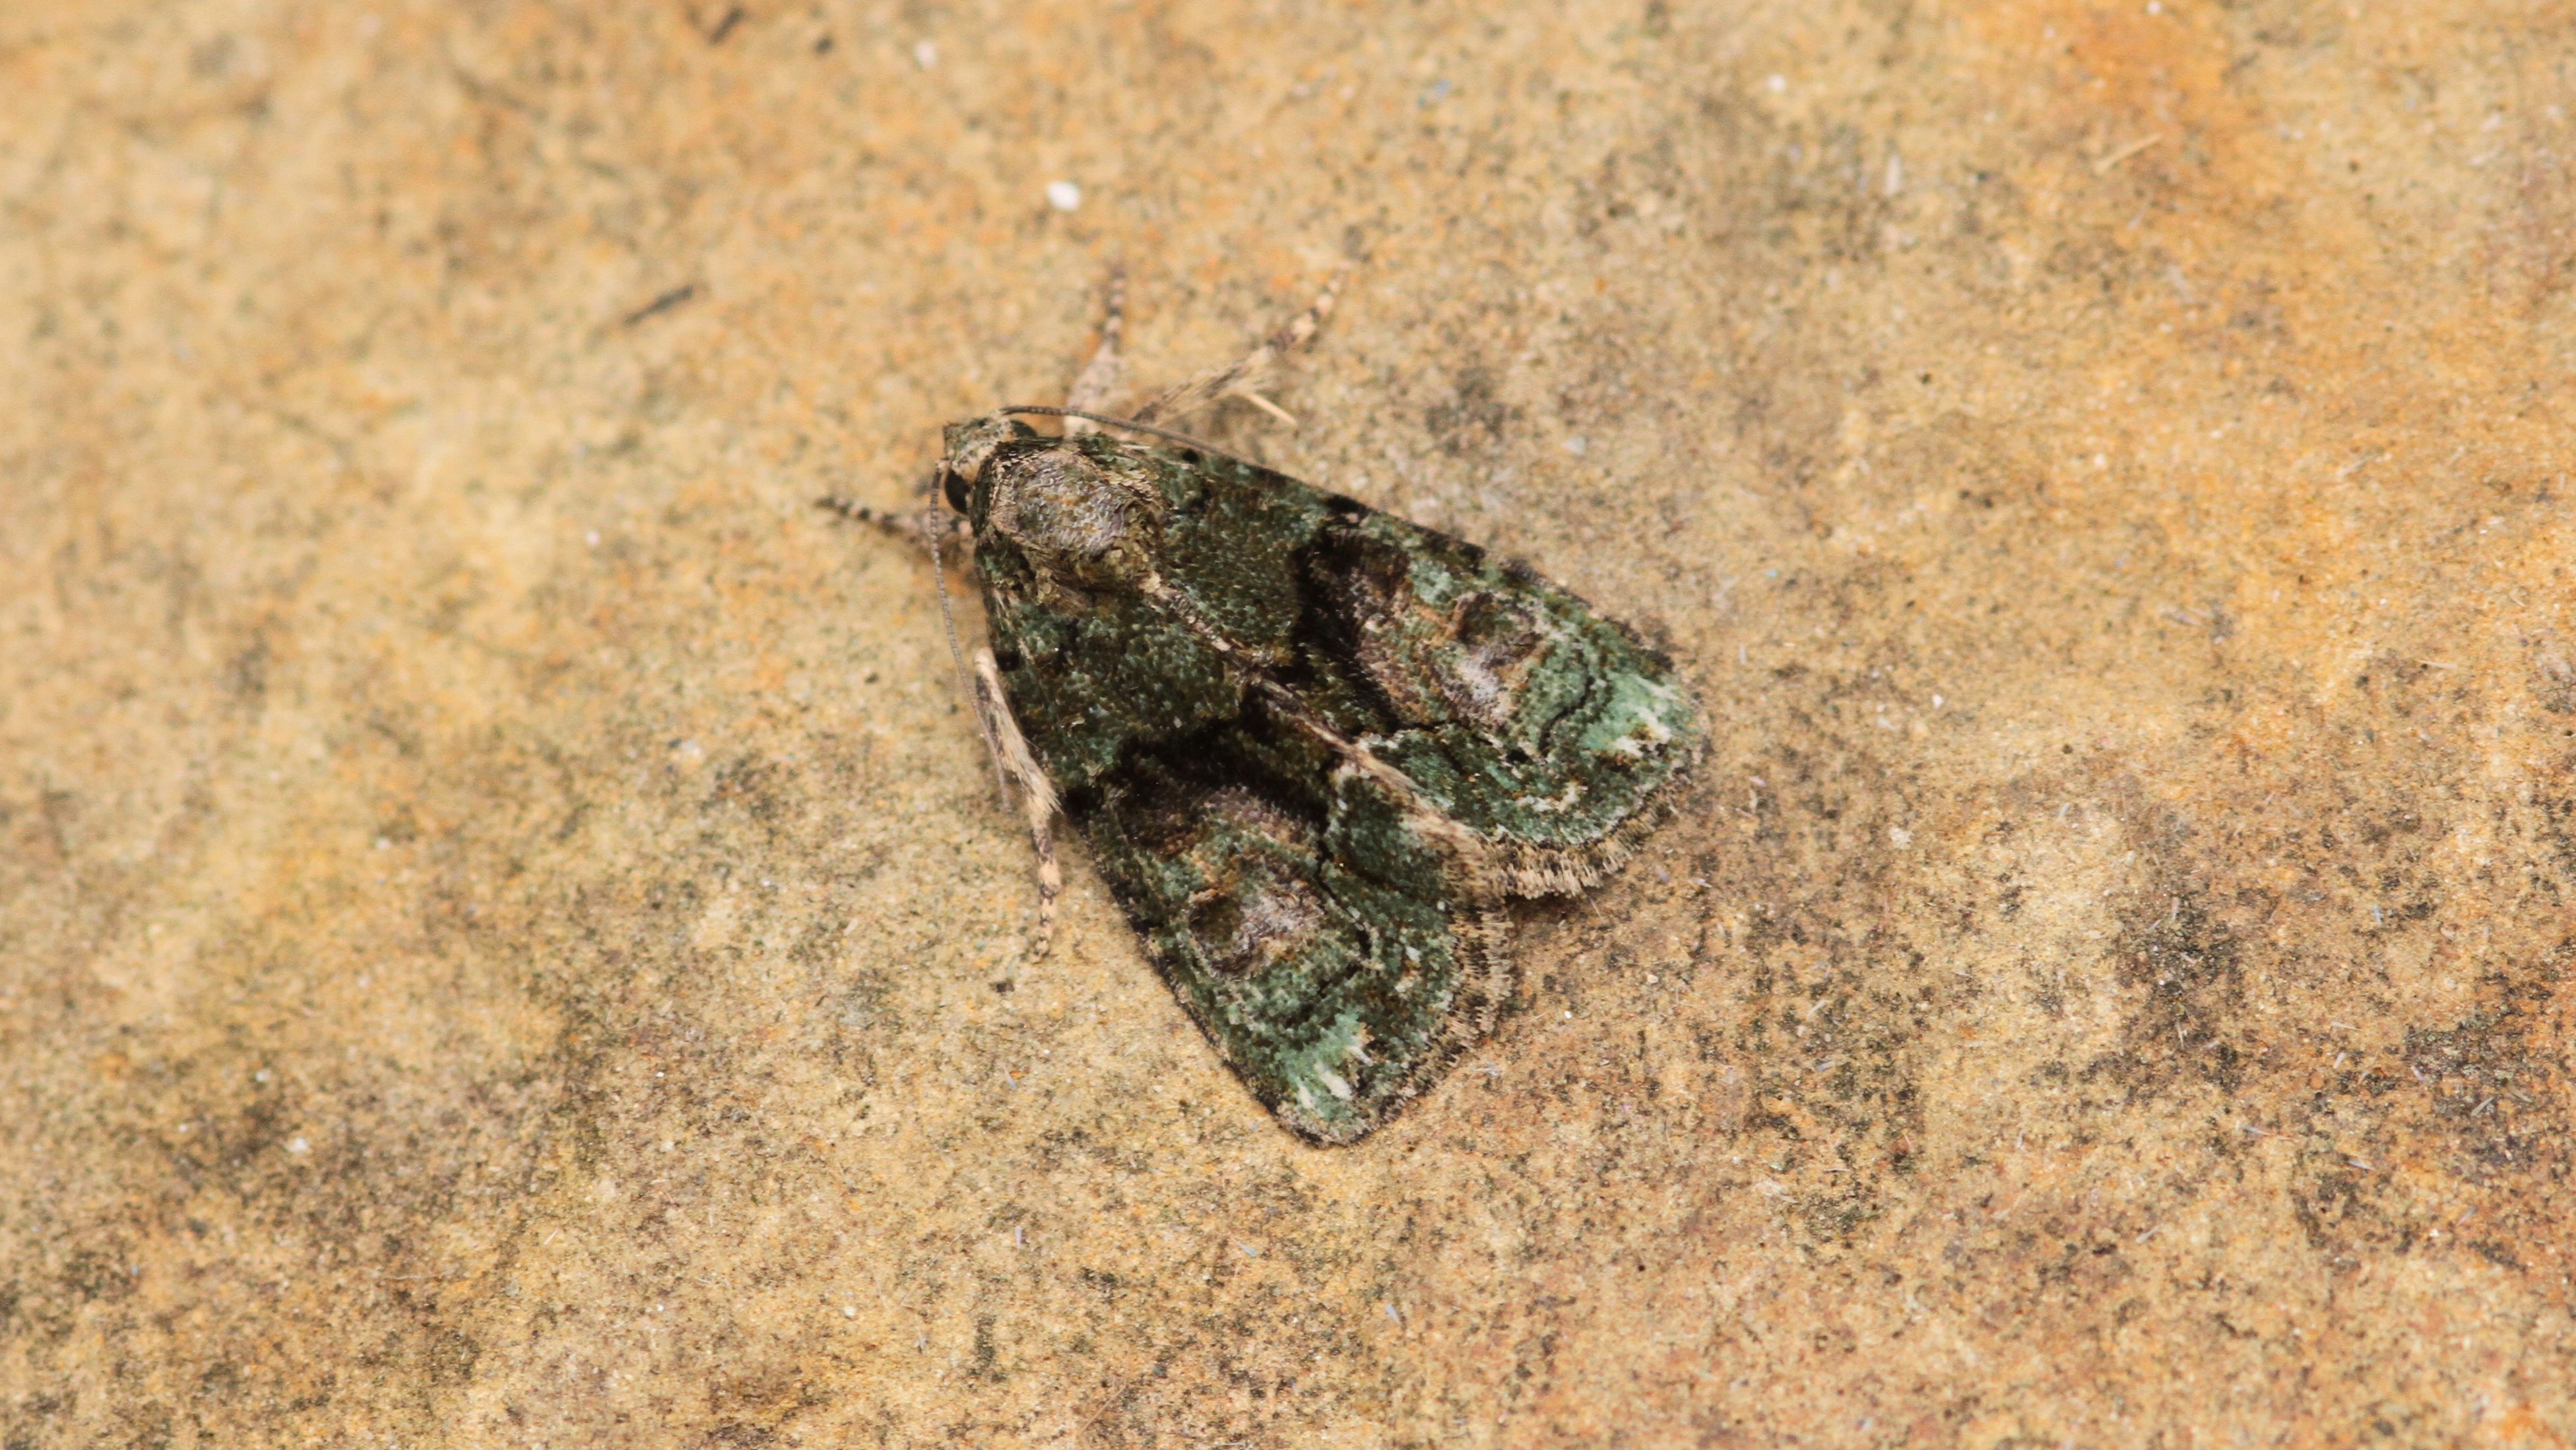 A picture of a tree-lichen beauty moth shows its mottled, lichen-like green wings.